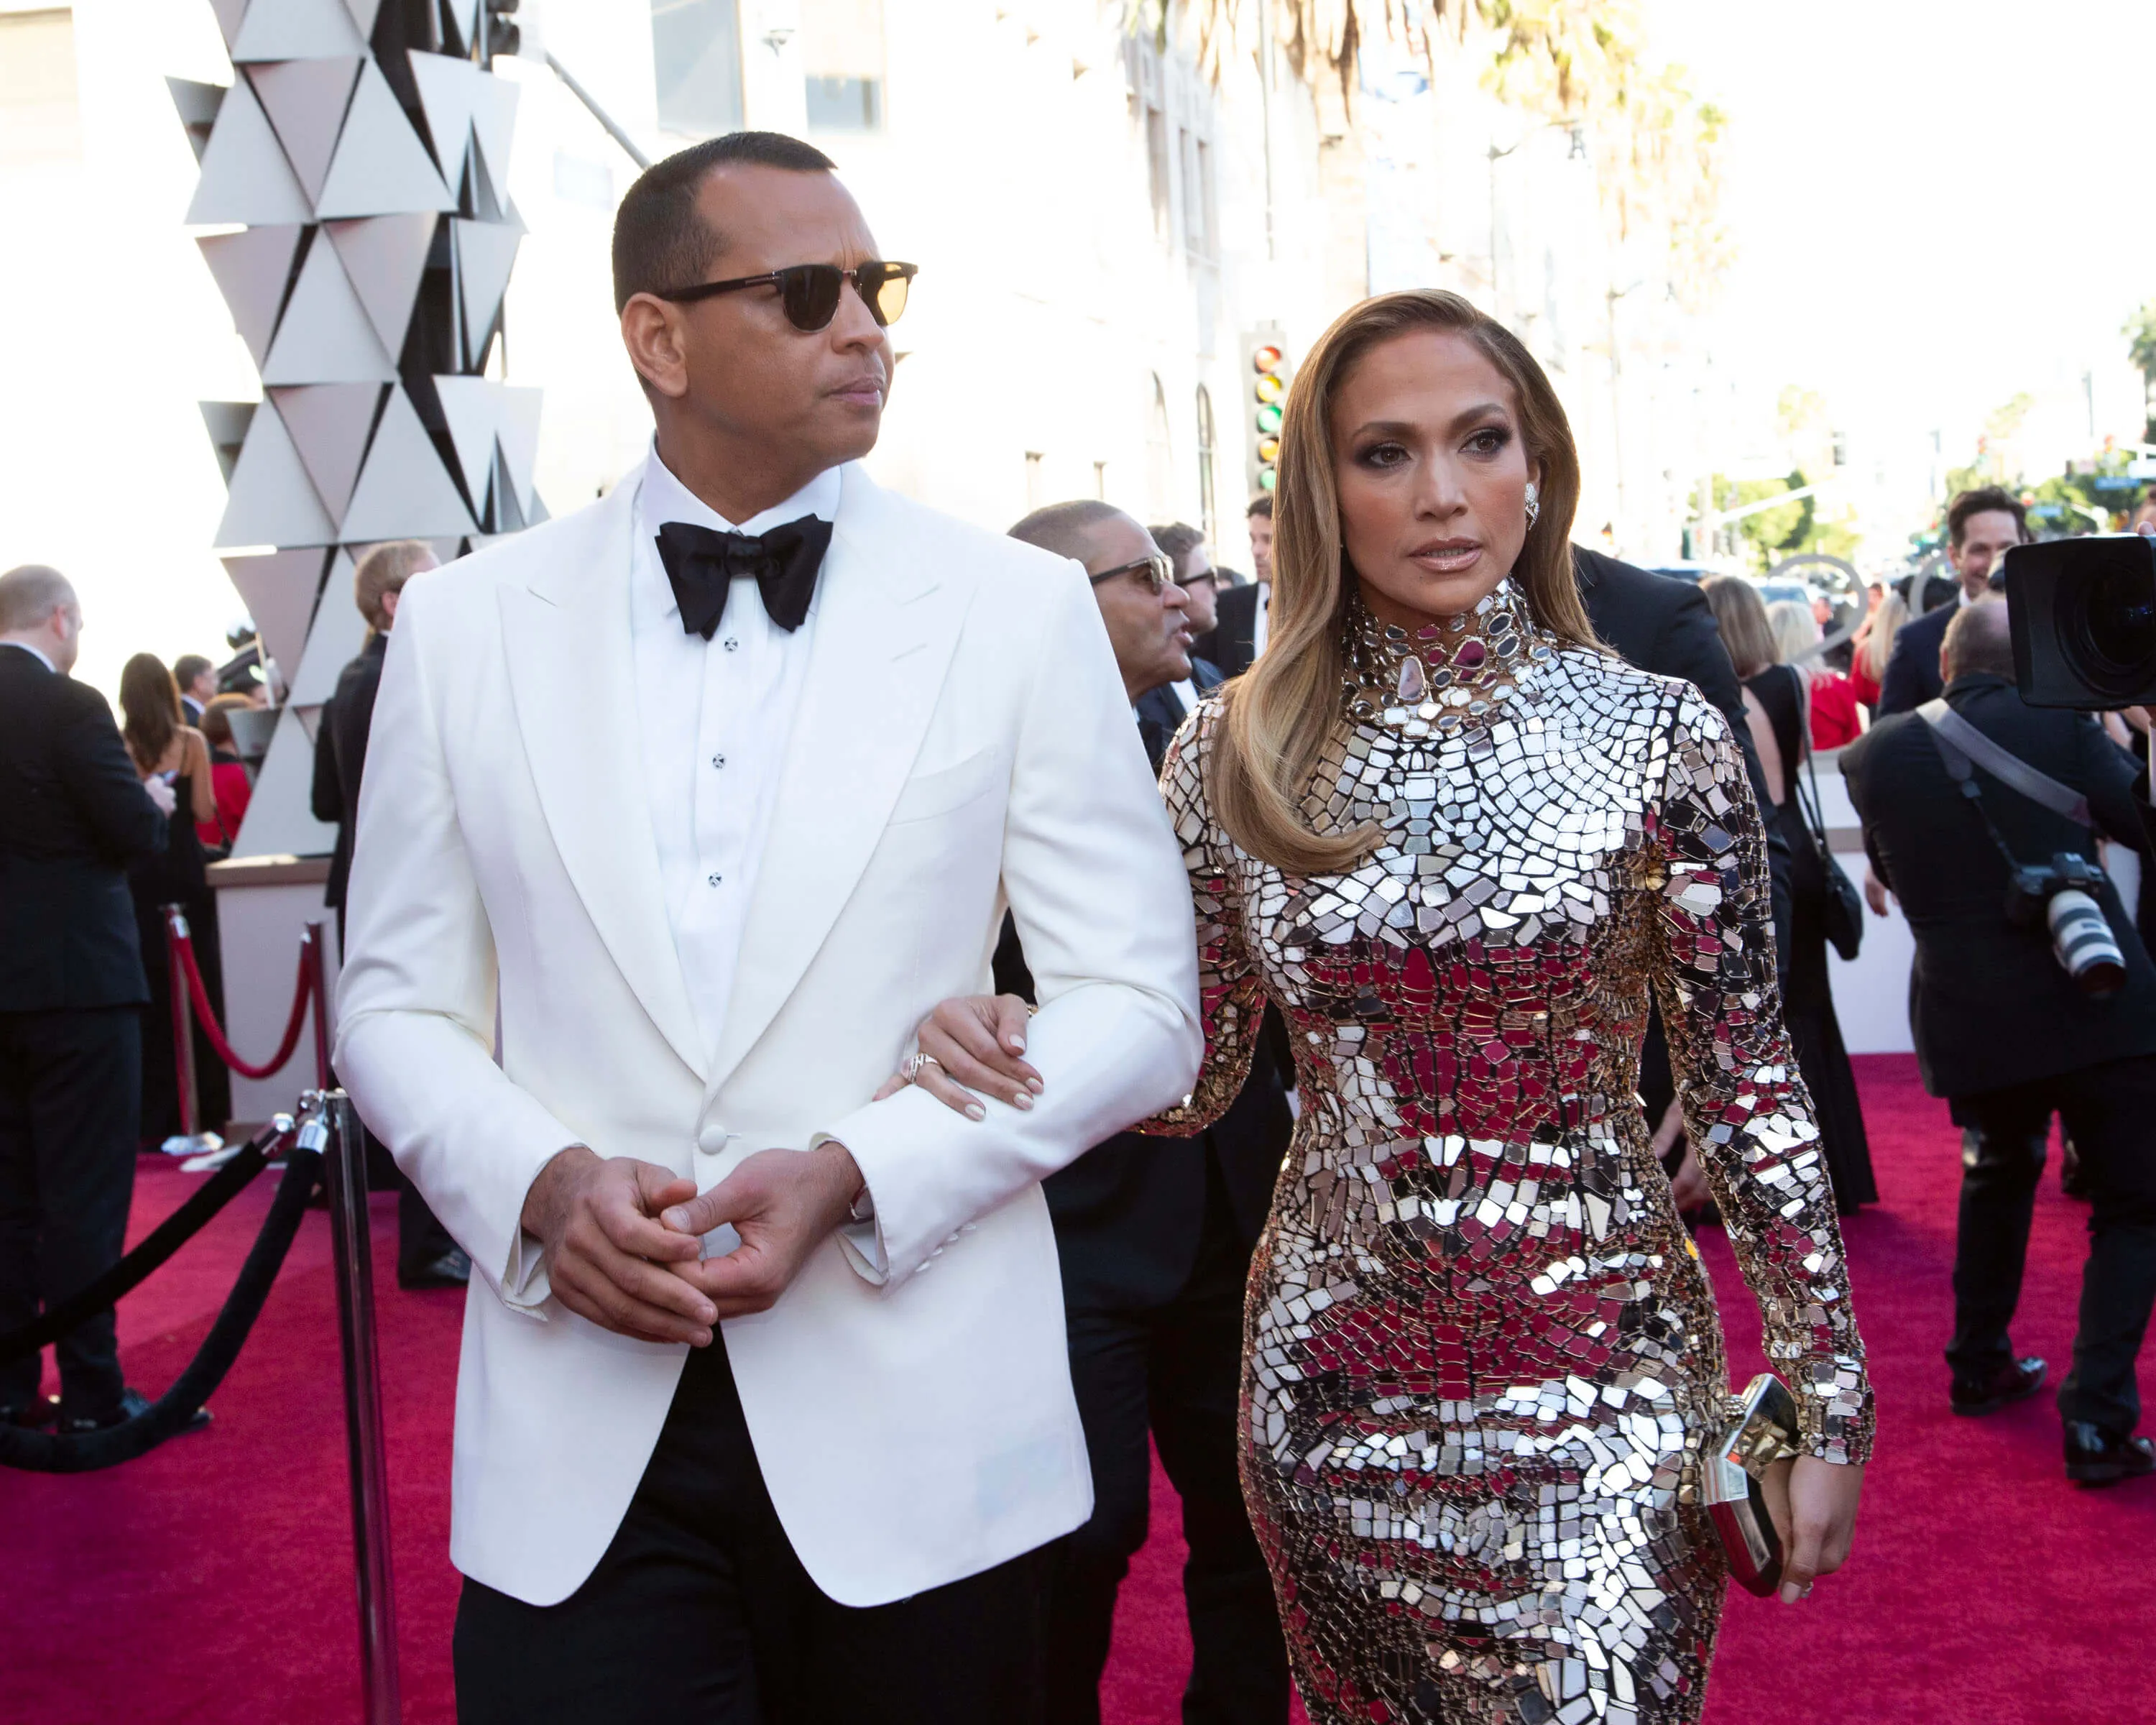 Alex Rodriguez and Jennifer Lopez walking together on the red carpet for the Academy Awards in 2019